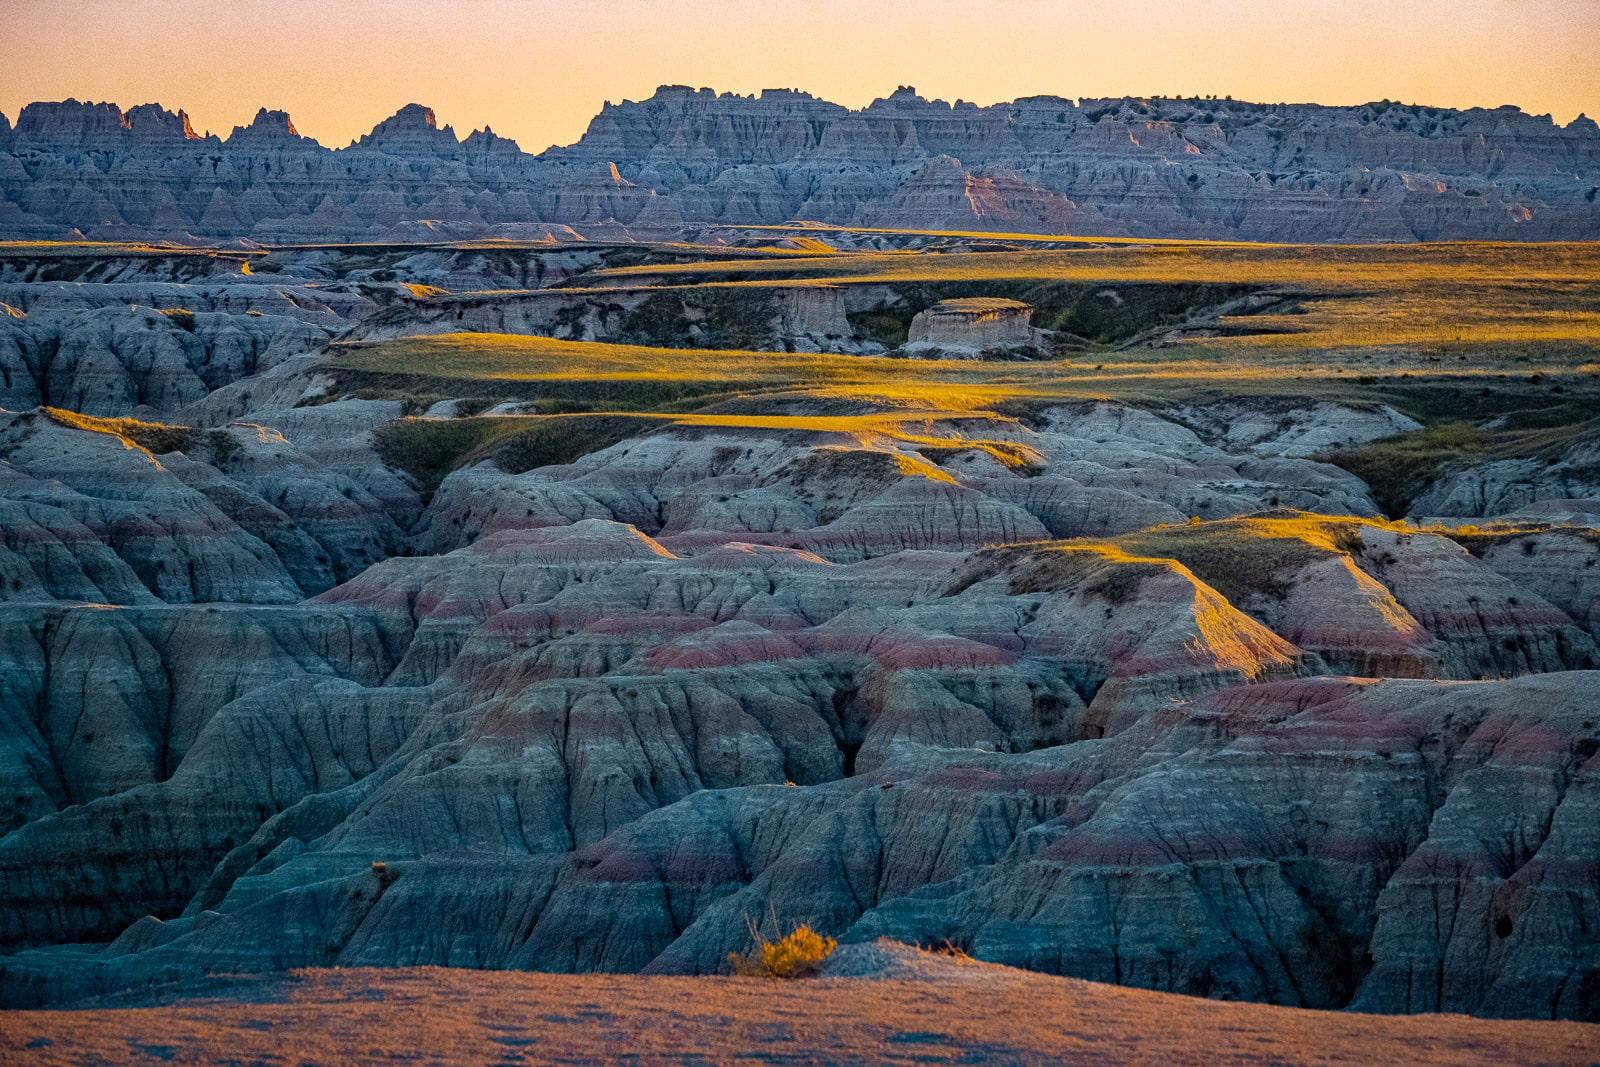 Remnants of the shortgrass prairie reflect the late afternoon, golden light in Badlands National Park, South Dakota.